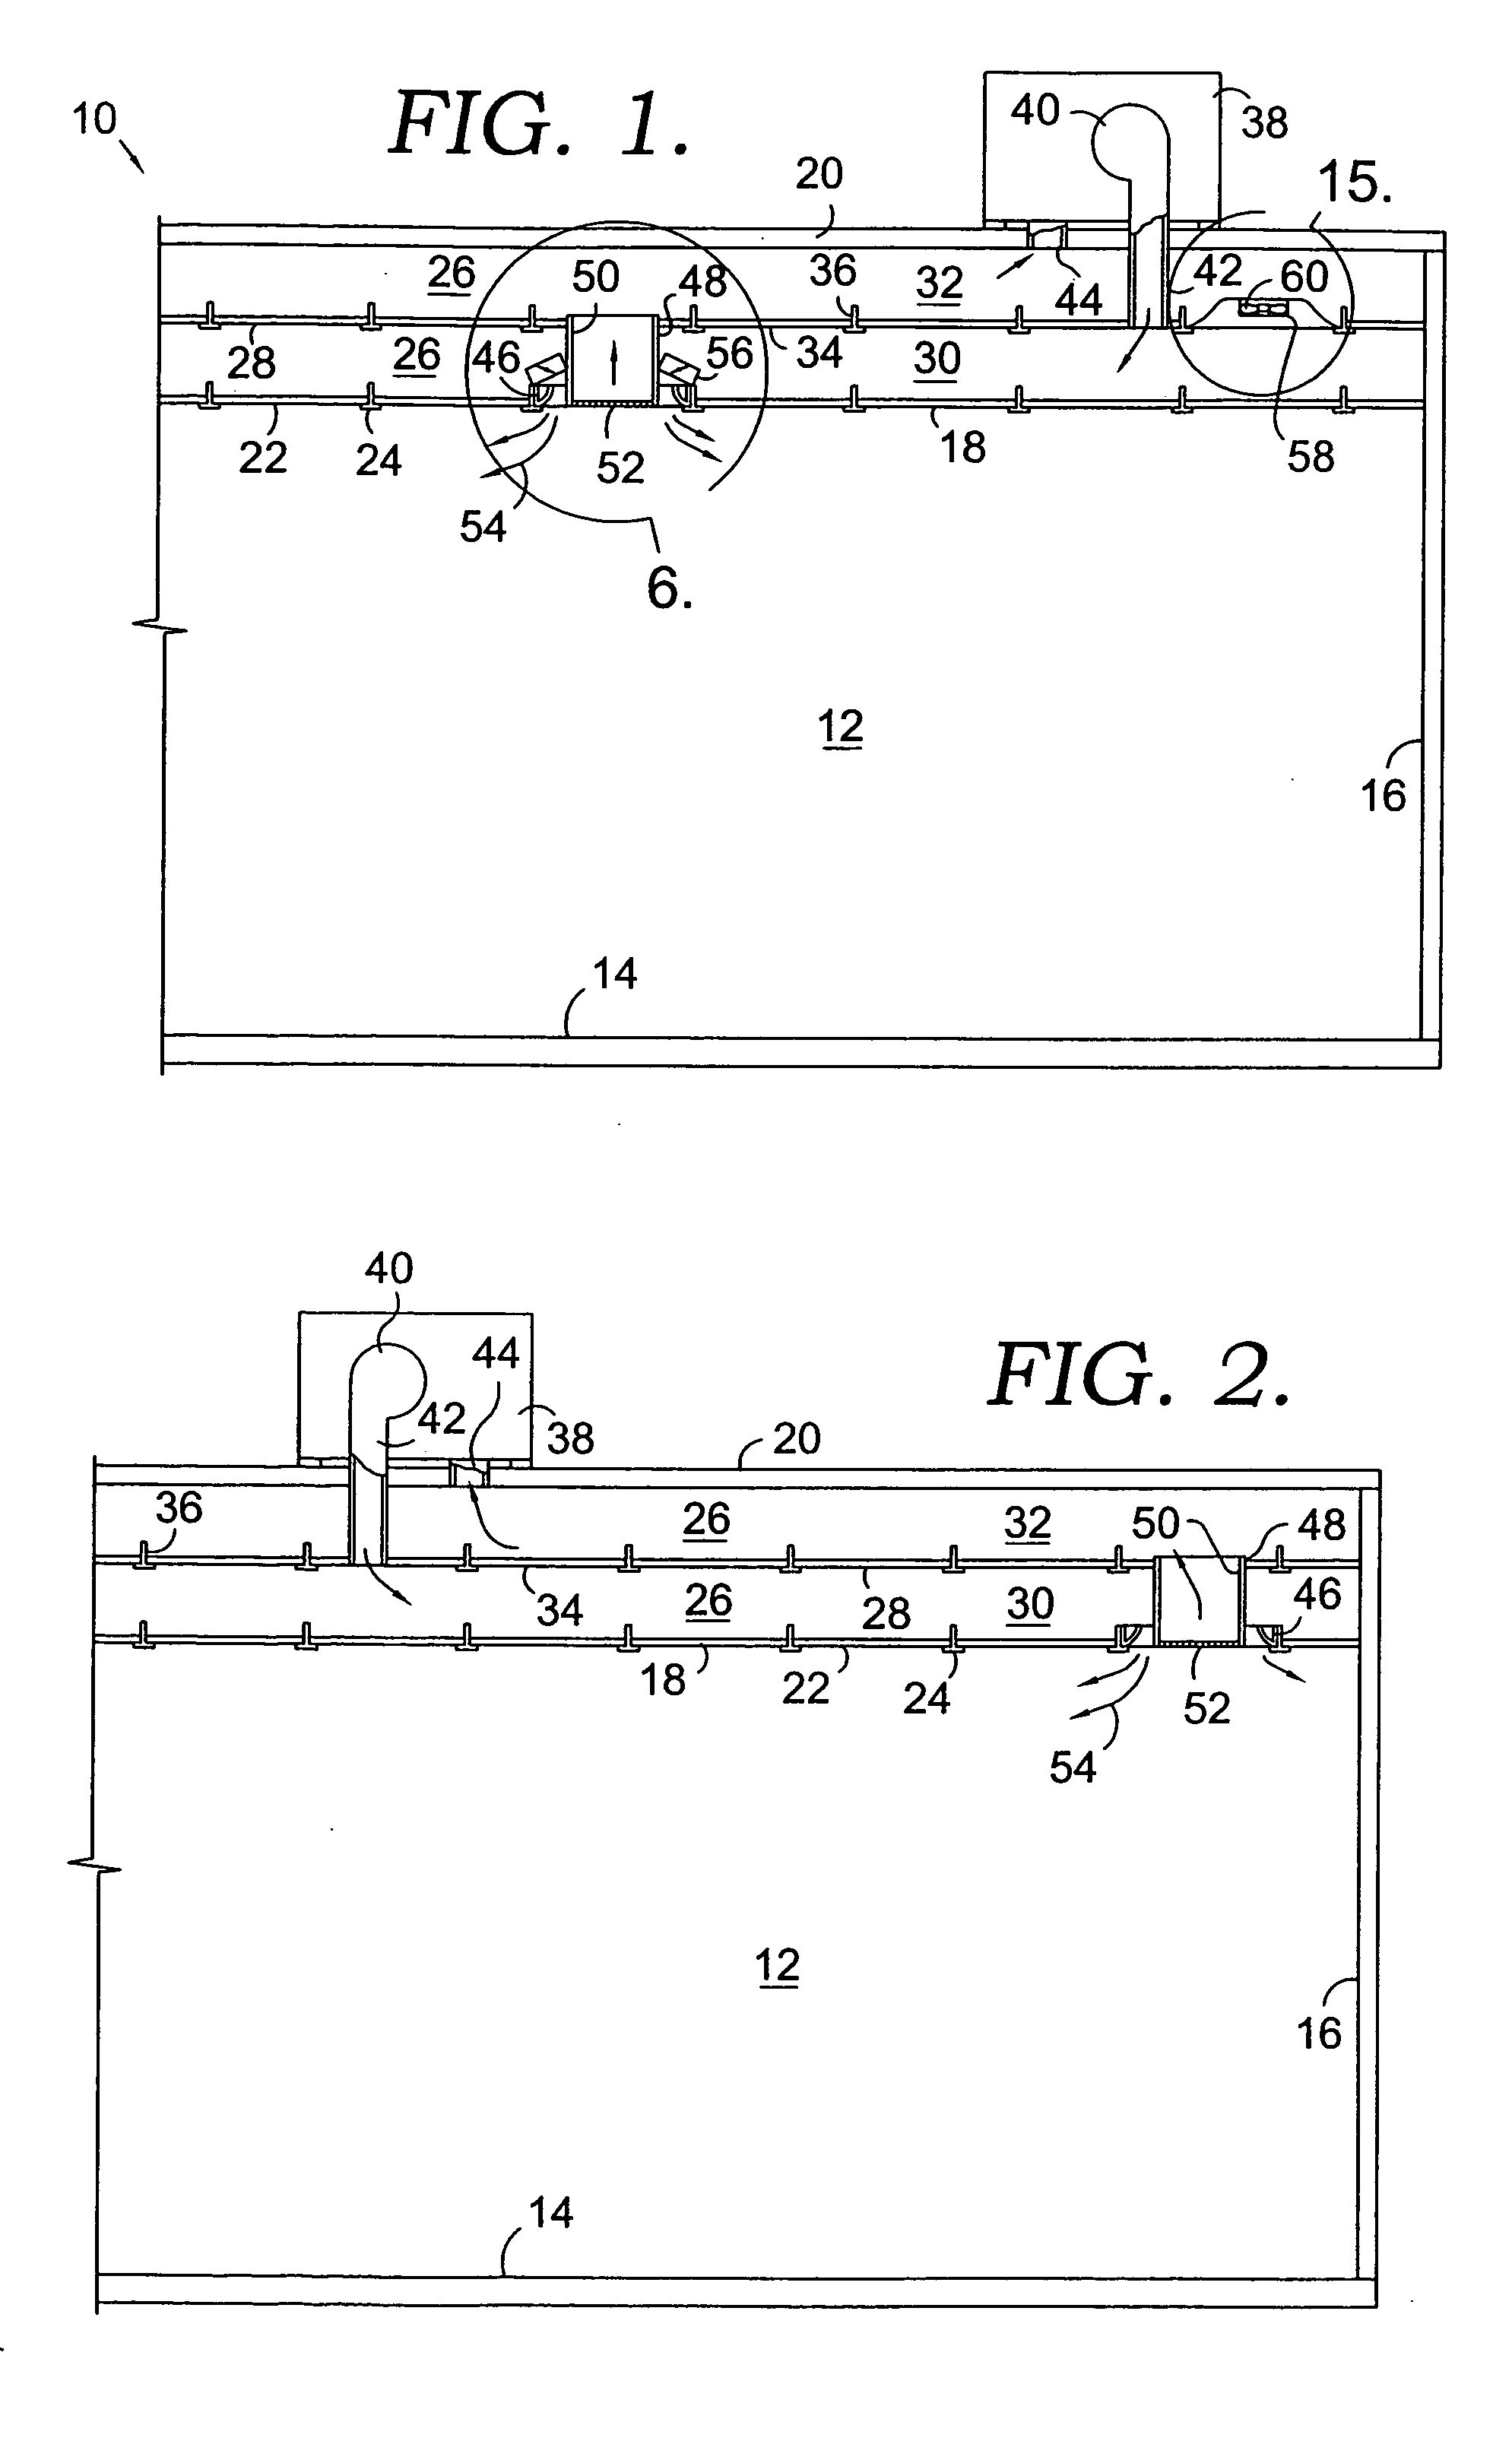 Method and apparatus for delivering conditioned air using dual plenums